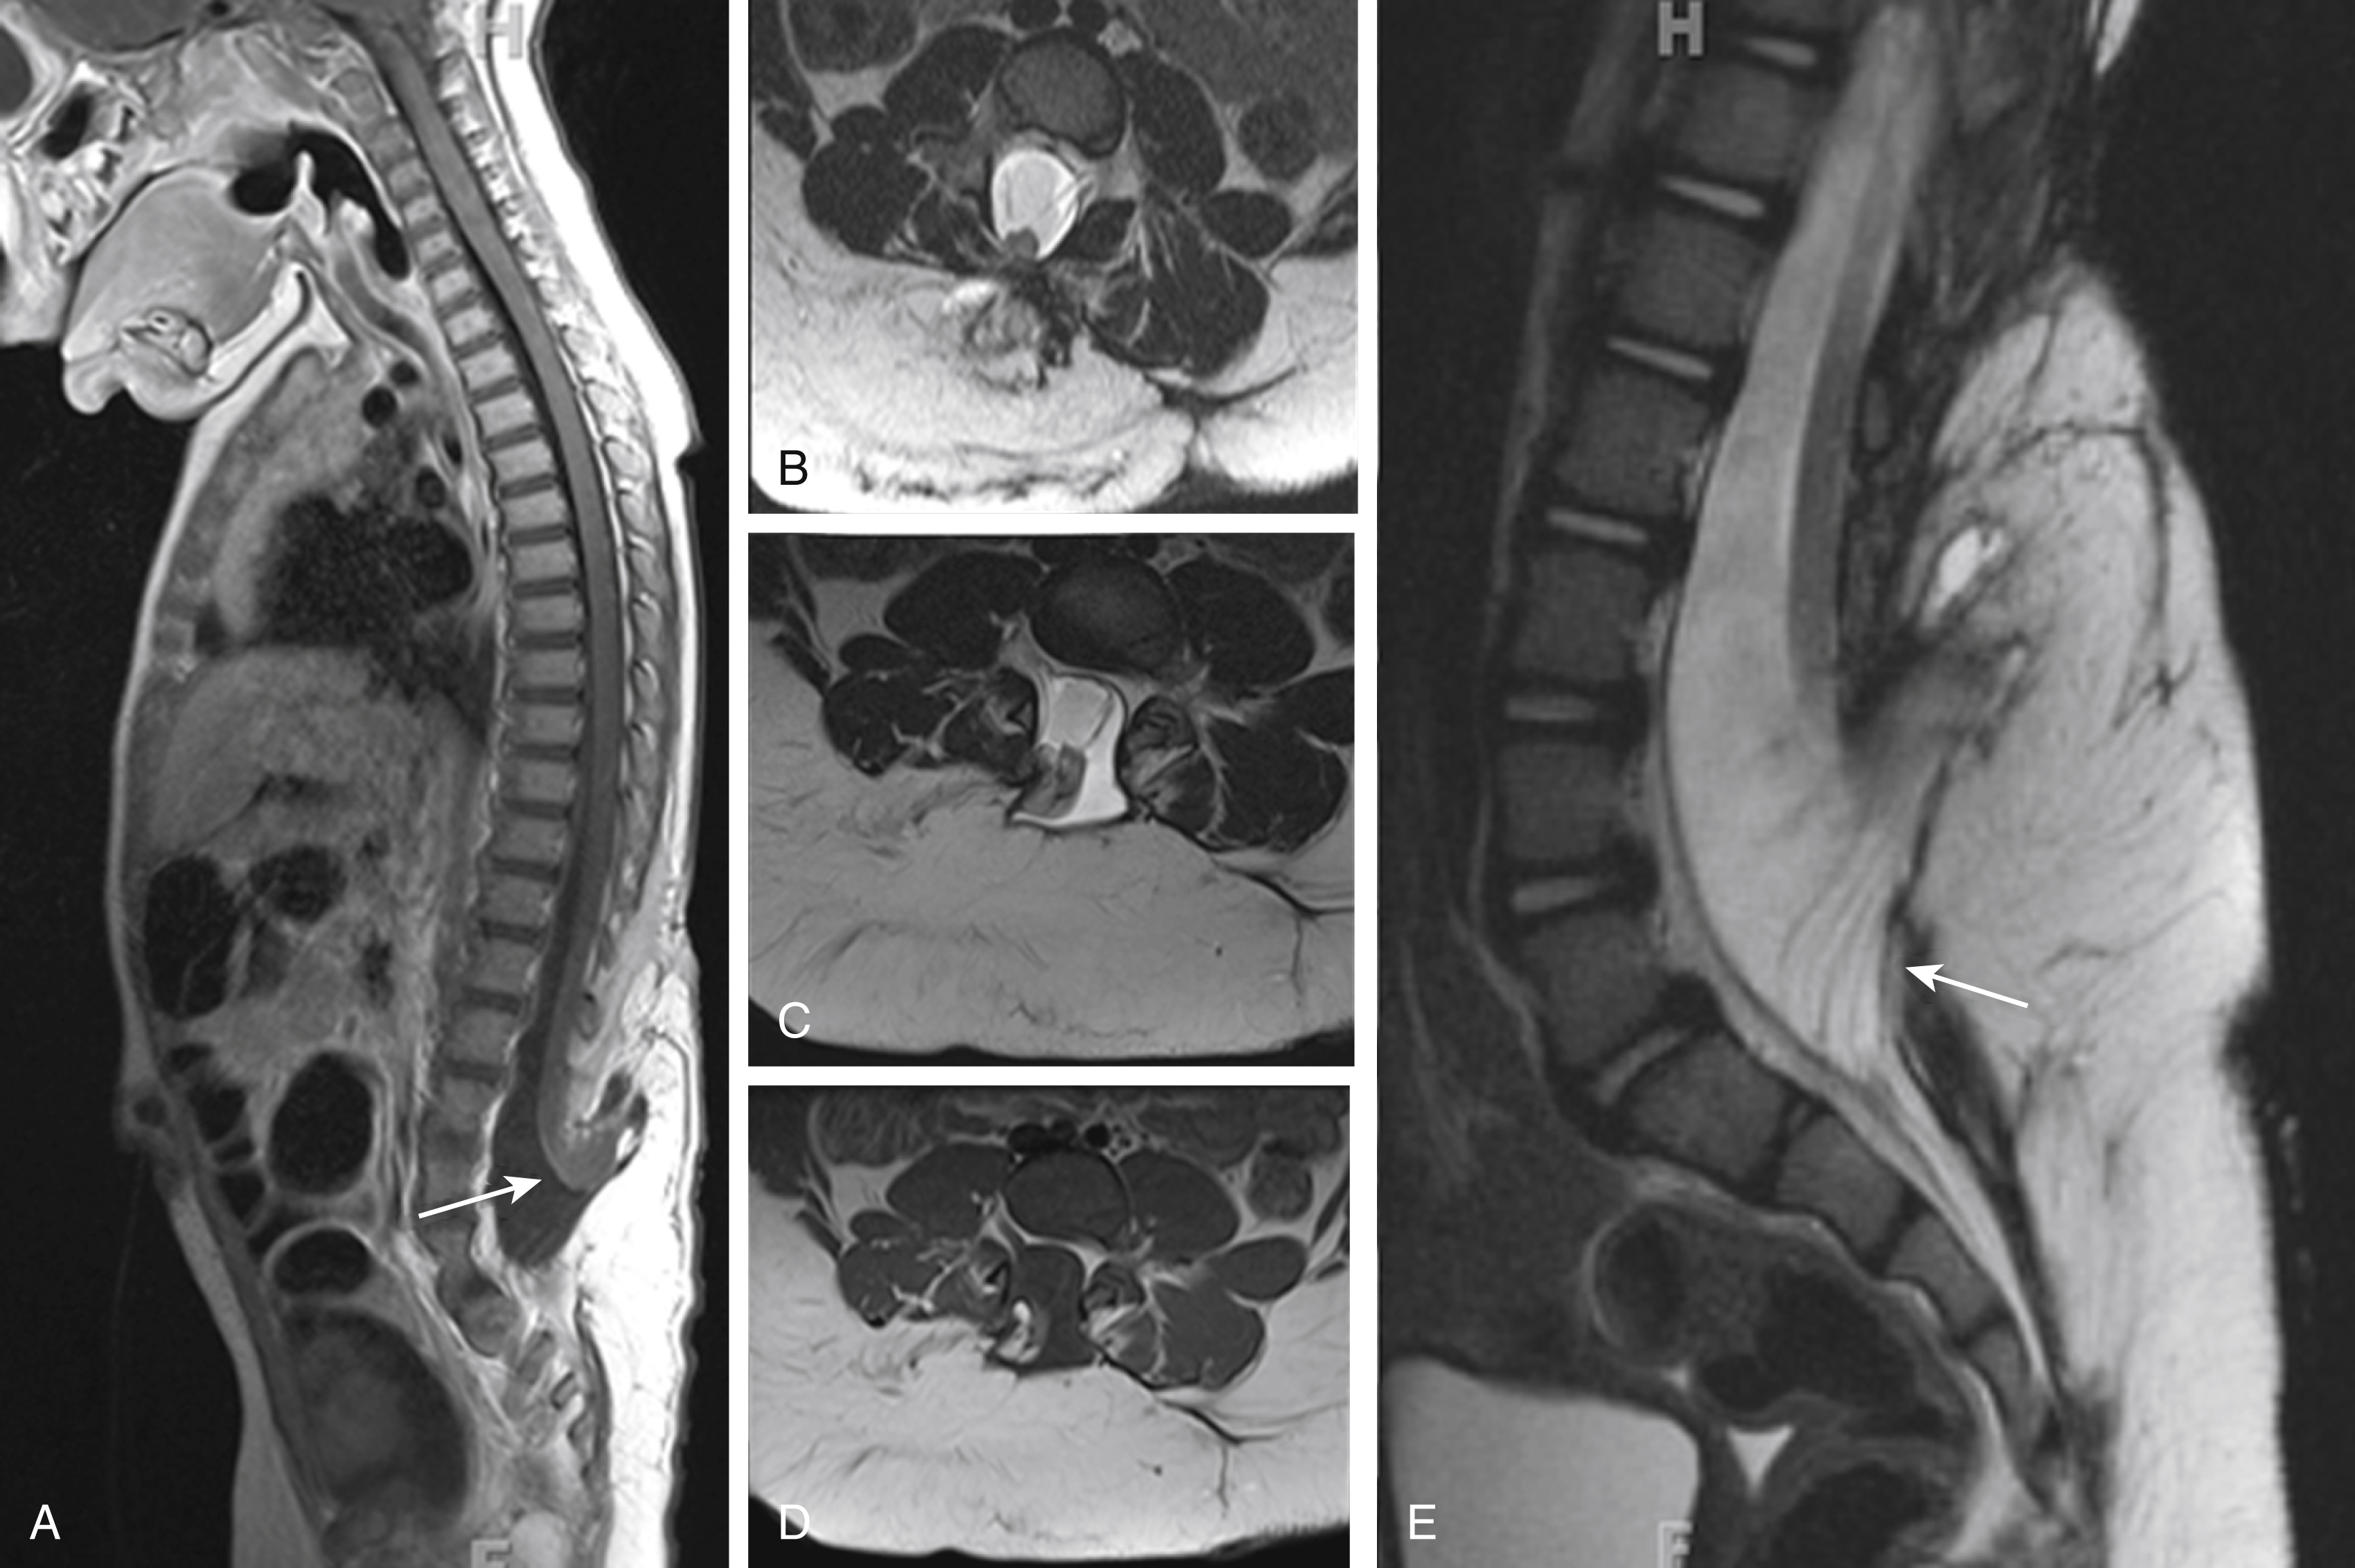 Fig. 29.6, (A) Sagittal T1-weighted (left image), (B,C) axial T2-weighted (middle, upper two images), (D) axial T1-weighted (middle, lower image), and (E) magnified sagittal T2-weighted (right image) magnetic resonance images of a neonate with a skin-covered lumbar lipomyelomeningocele. The neural placode is herniating outside of the widened spinal canal and is dorsally covered by a T2/T1-hyperintense lipoma that is extending from the subcutaneous region into the widened spinal canal. The neural placode is partially rotated. The anterior and posterior nerve roots are located along the anterior surface of the neural placode and are seen as thin, stretched nerves coursing through the cerebrospinal fluid-filled dural sack ( arrow ). The musculature is rather well developed; no Chiari type II malformation was seen.